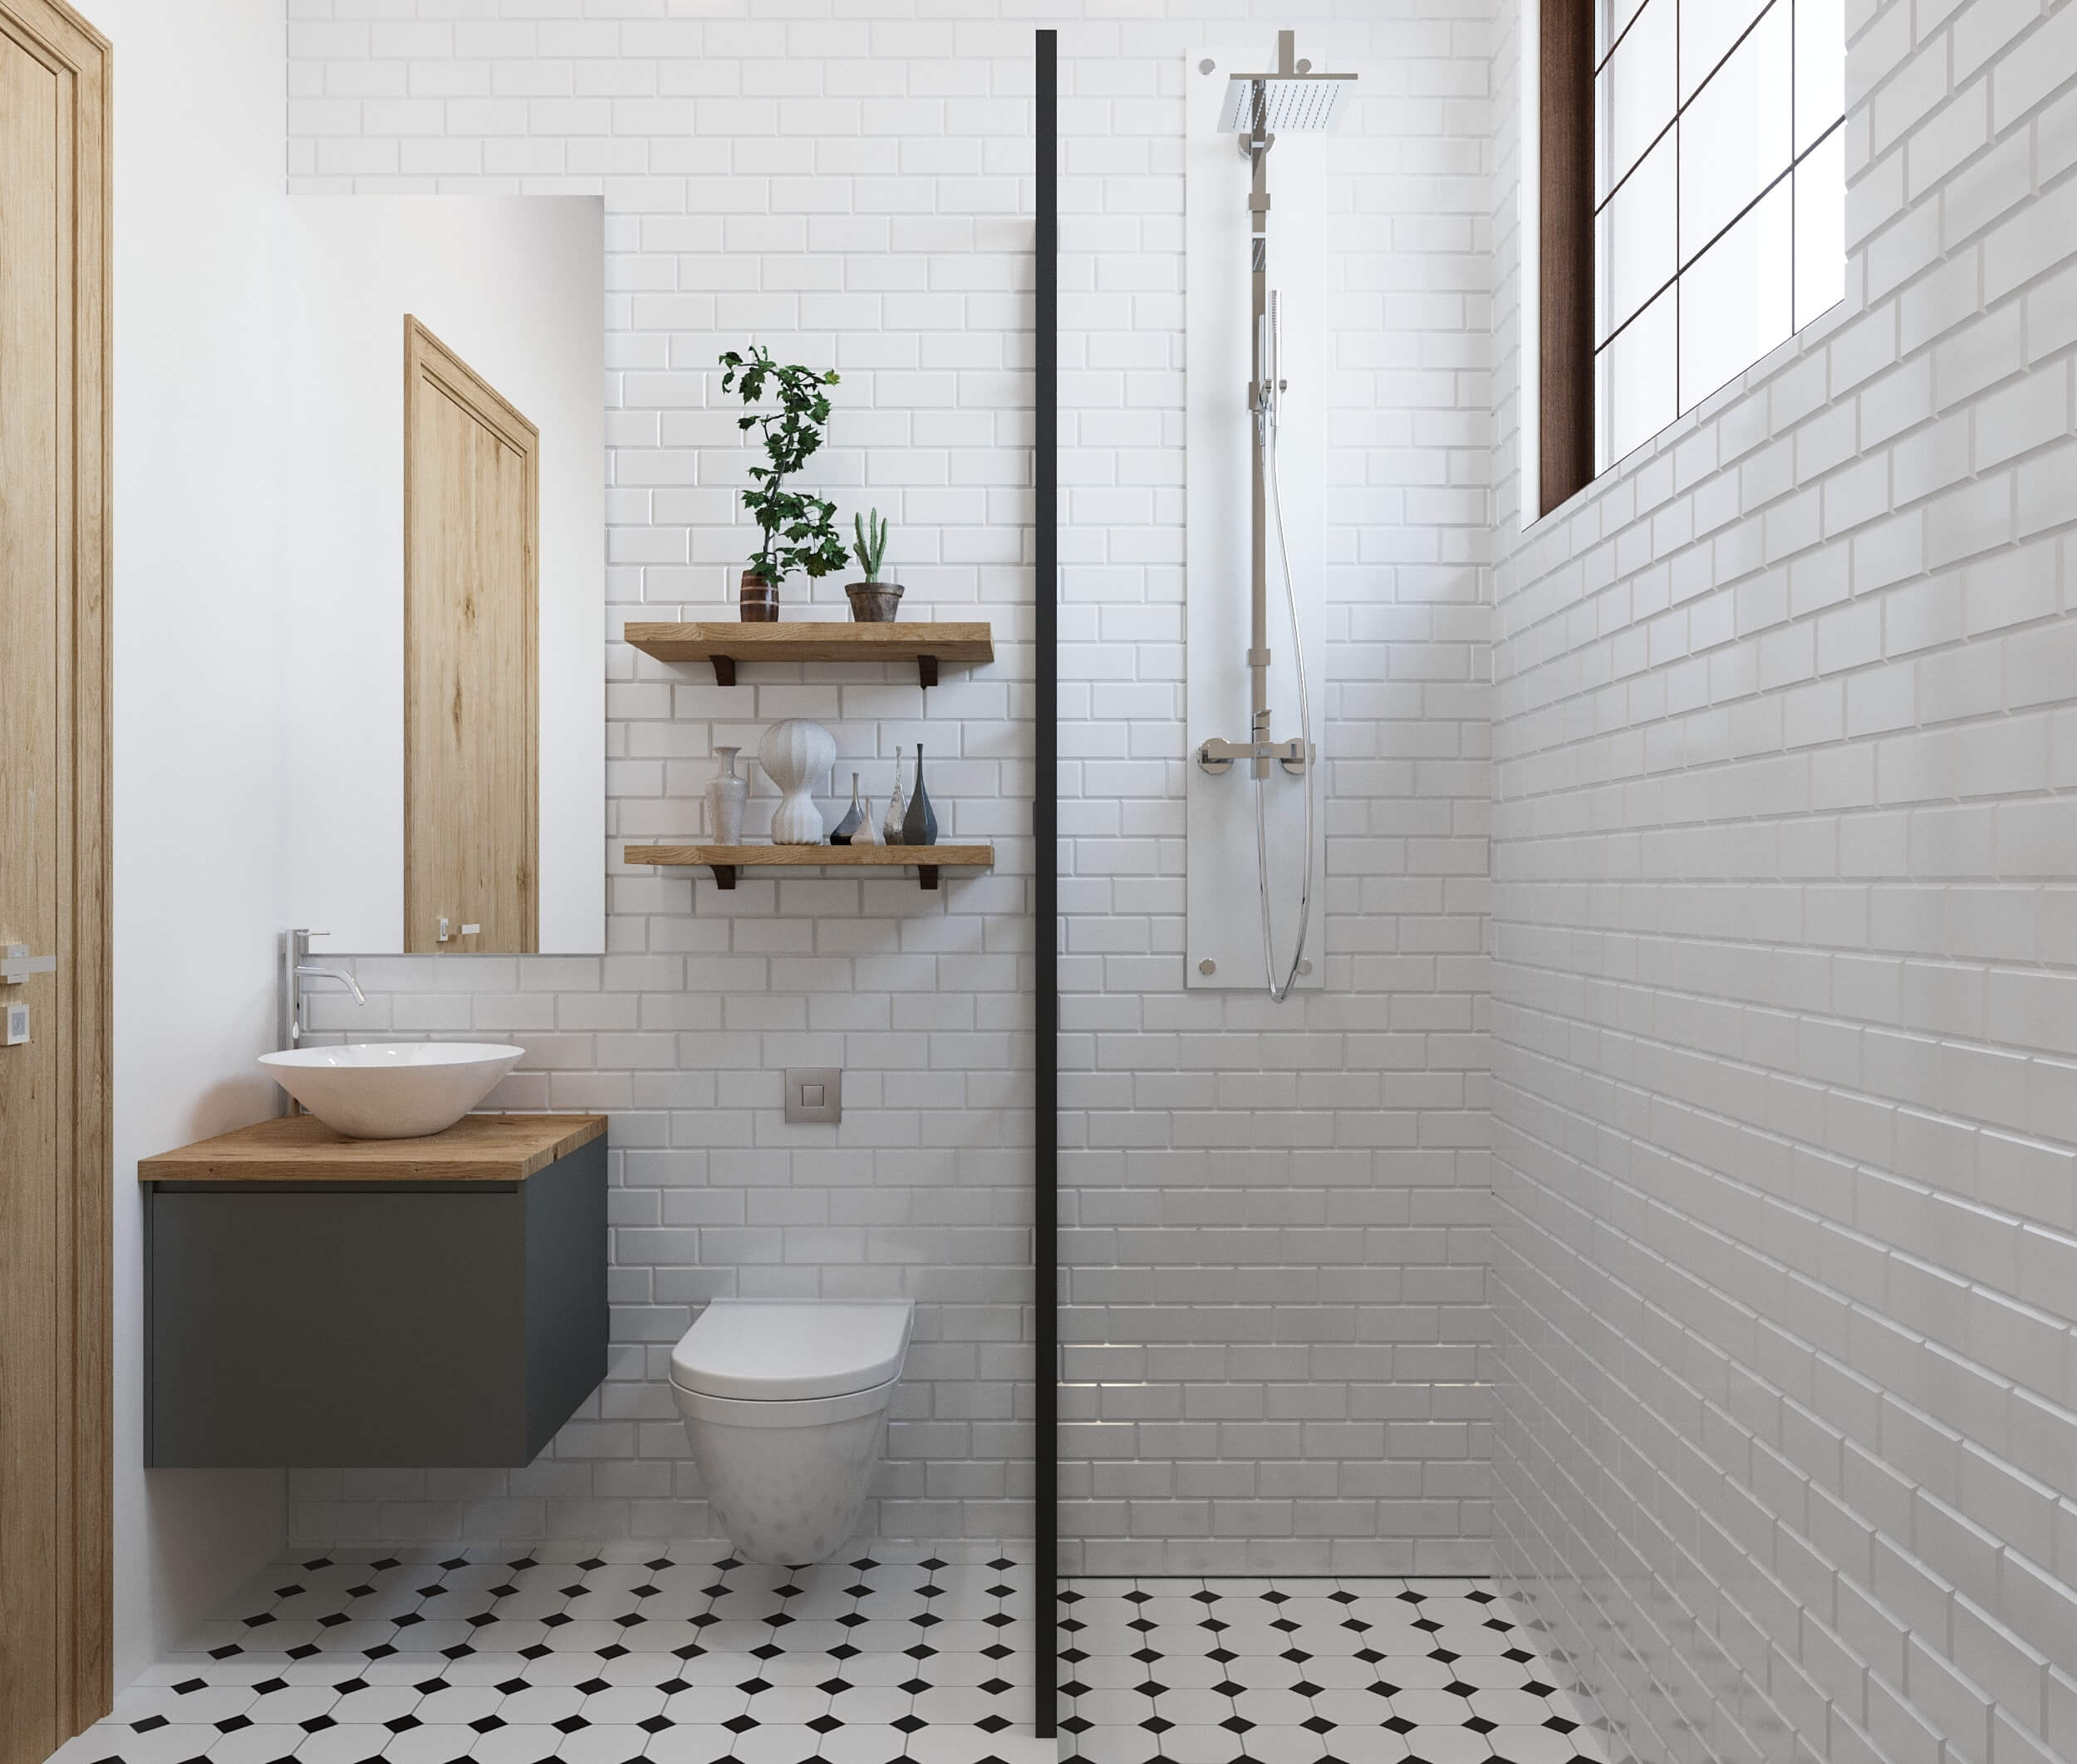 a clean and bright bathroom that has been renovated eco-consciously